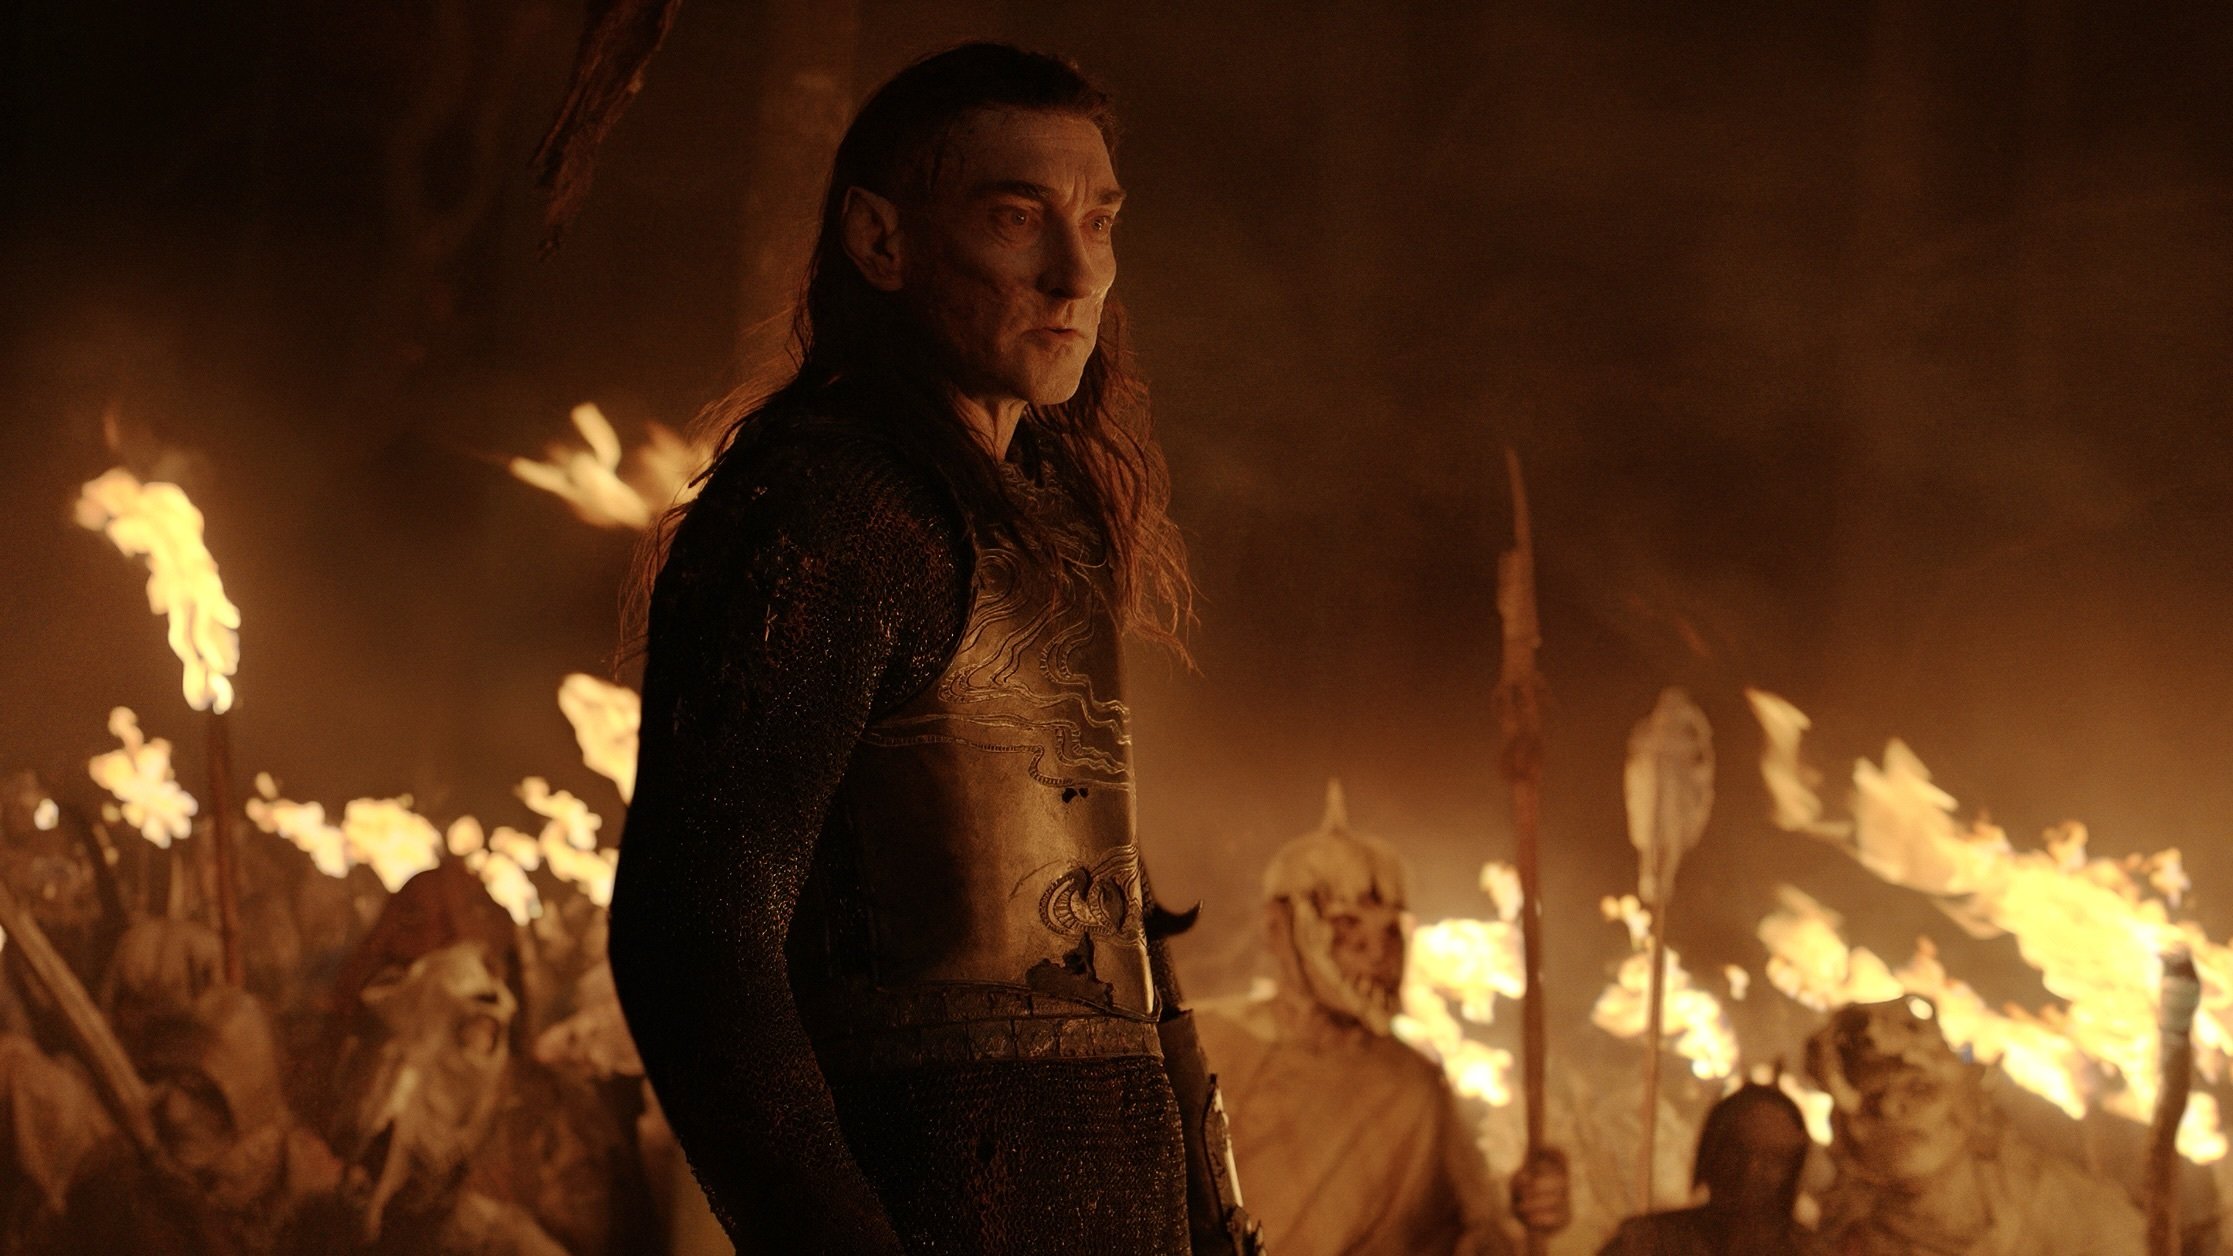 An elf with extremely pale and pockmarked skin stands, armored, in front of a horde of orcs carrying torches.